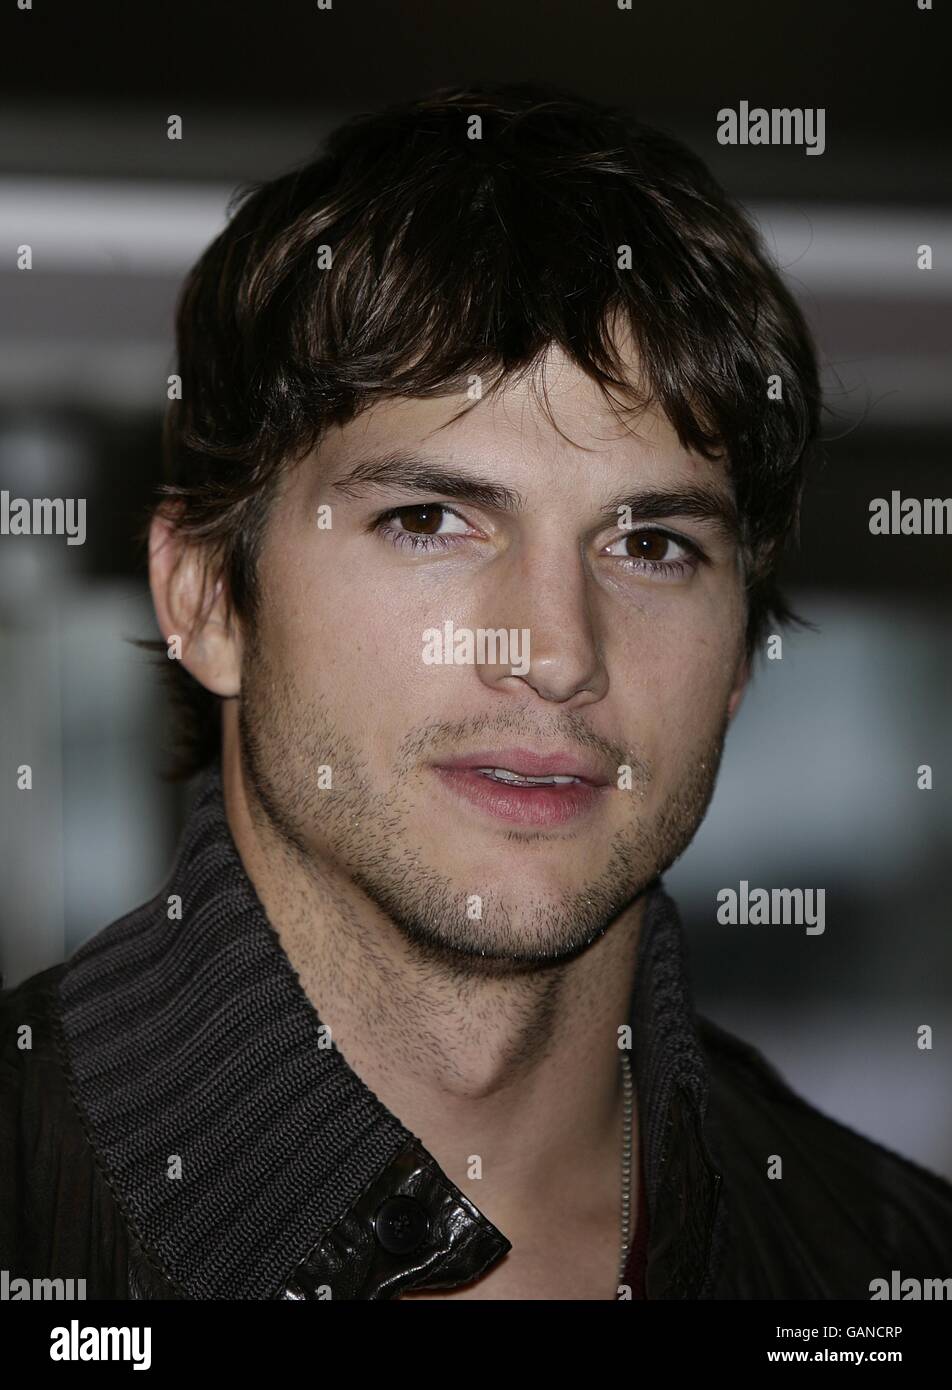 Ashton Kutcher at the UK premiere of What Happens In Vegas at the Odeon West End Cinema, Leicester Square, London. Stock Photo